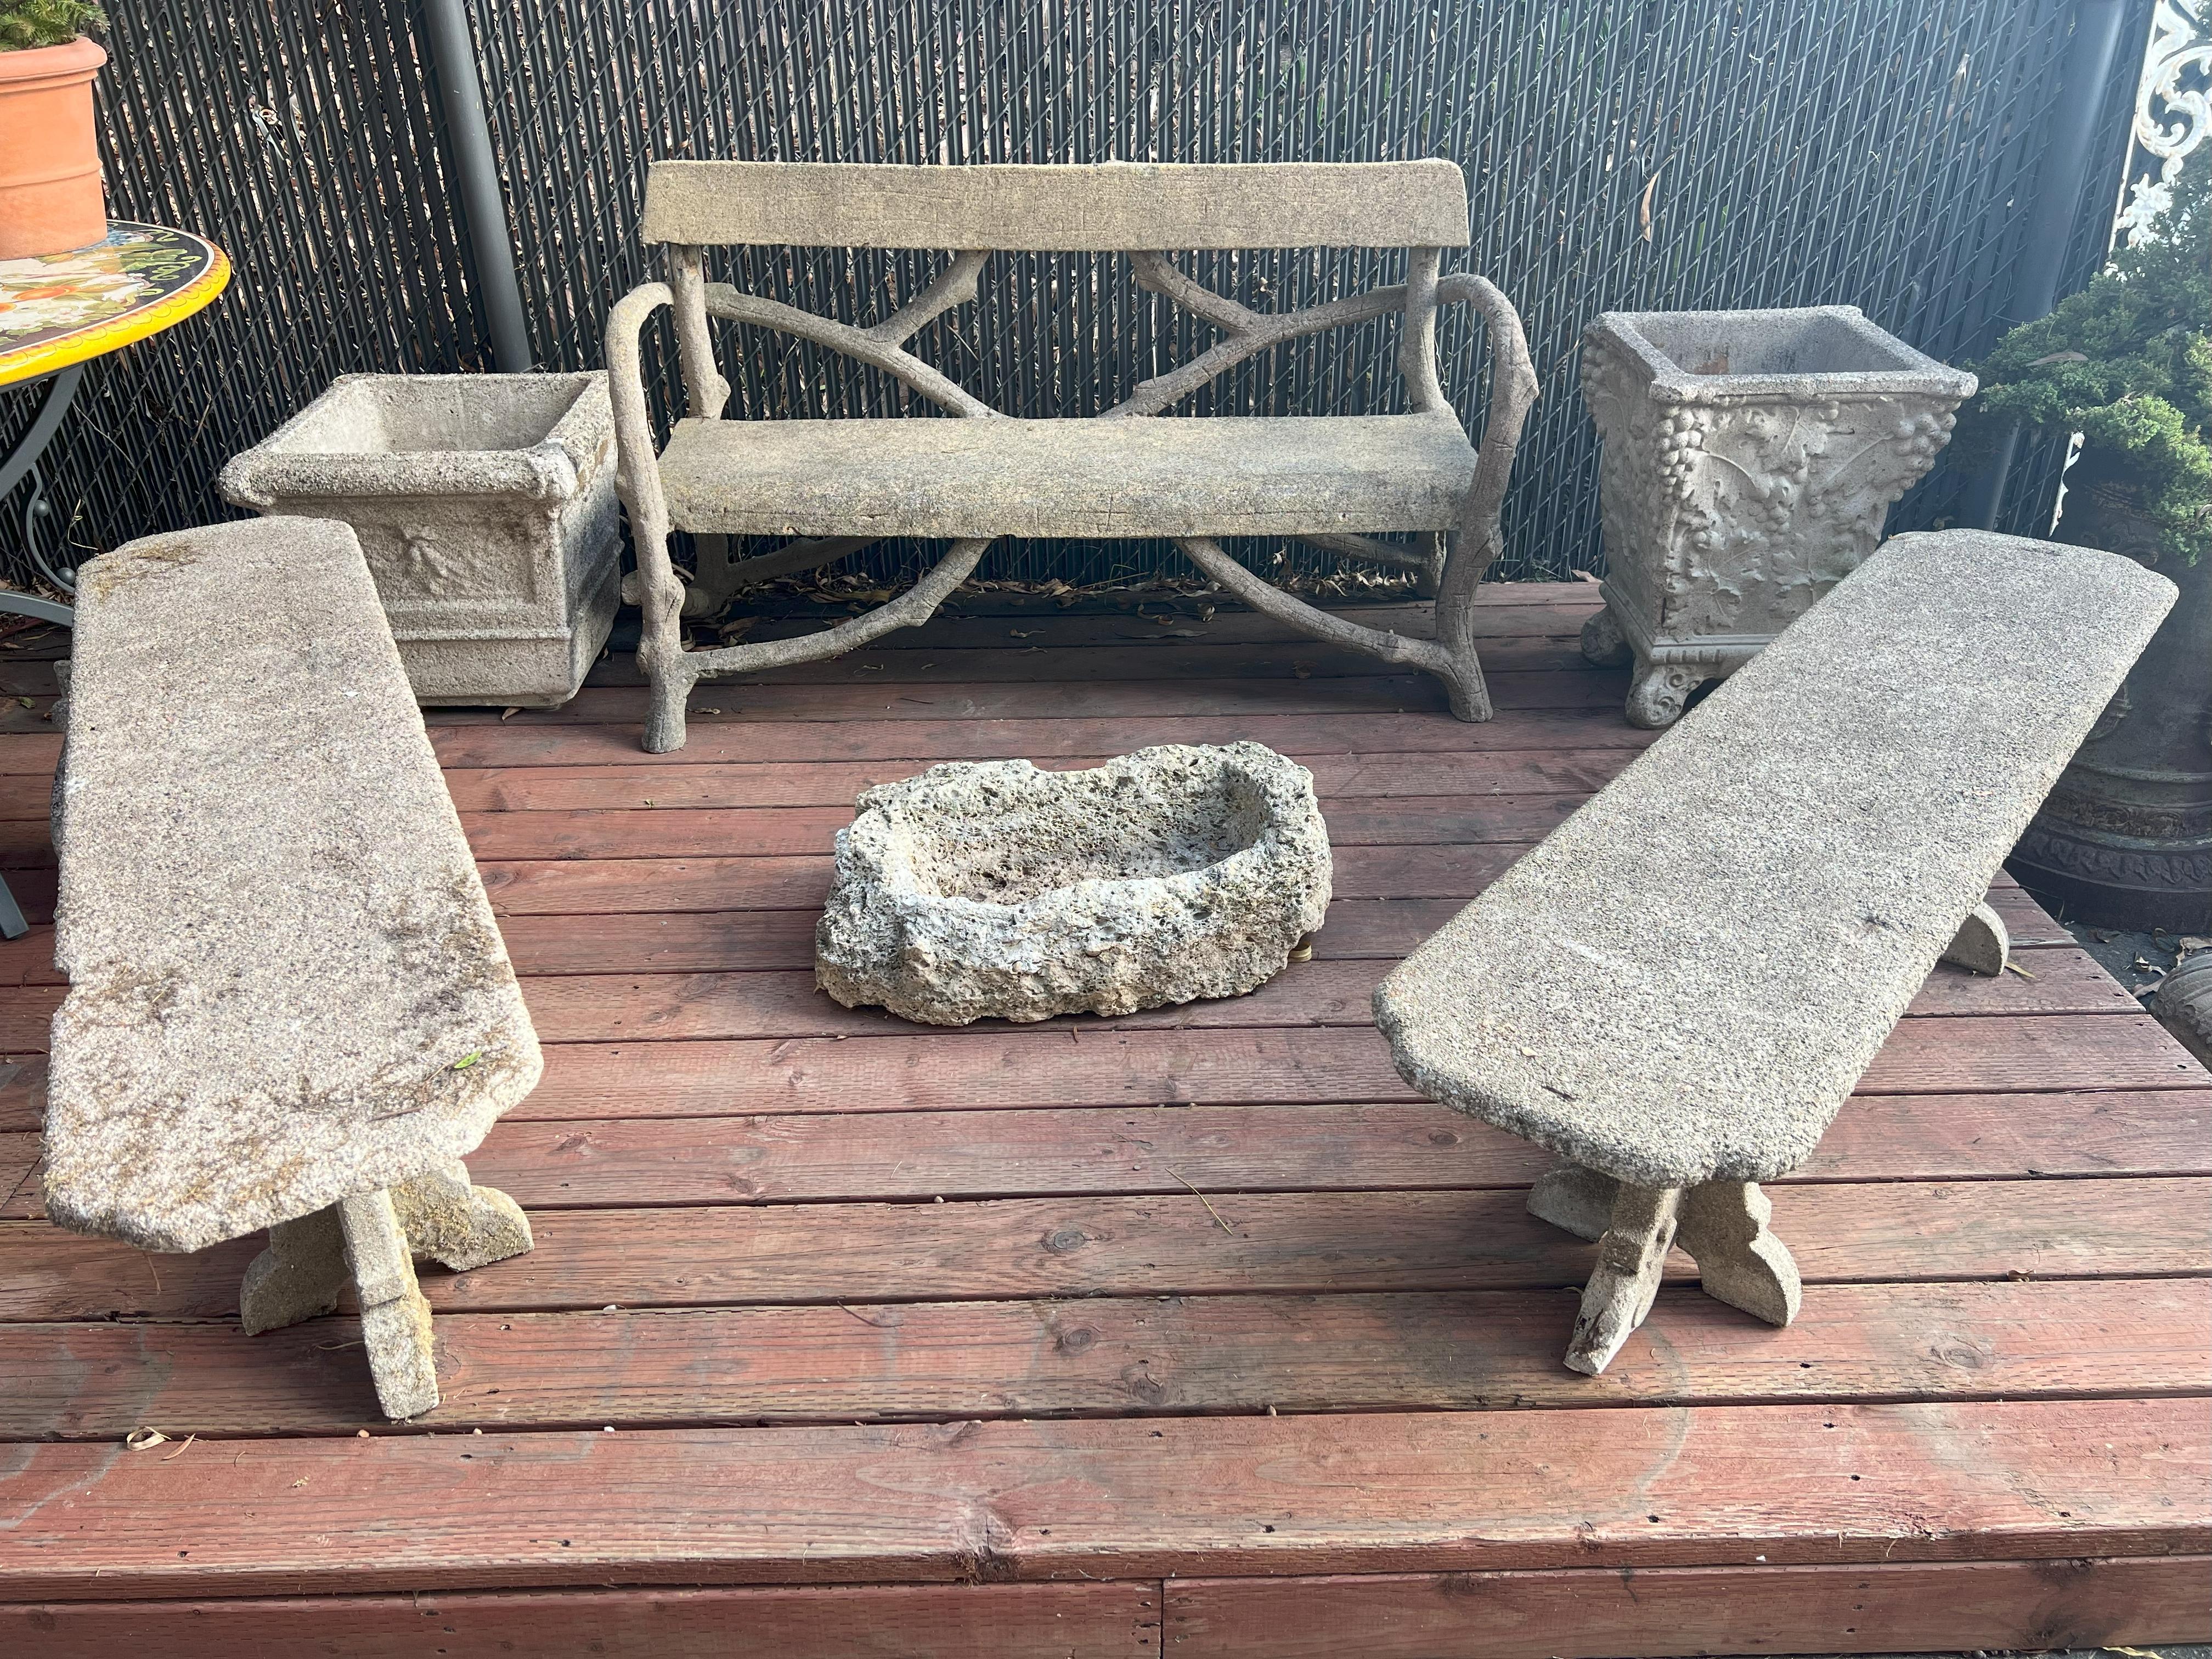 This Italian Antique Art Nouveau Garden Stone Faux Bois Bench, built circa 1920, is an hand crafted concrete garden bench. 
With a faux wood plank as a base and back to the bench, concrete branches and tree trunks extend down to create the four legs